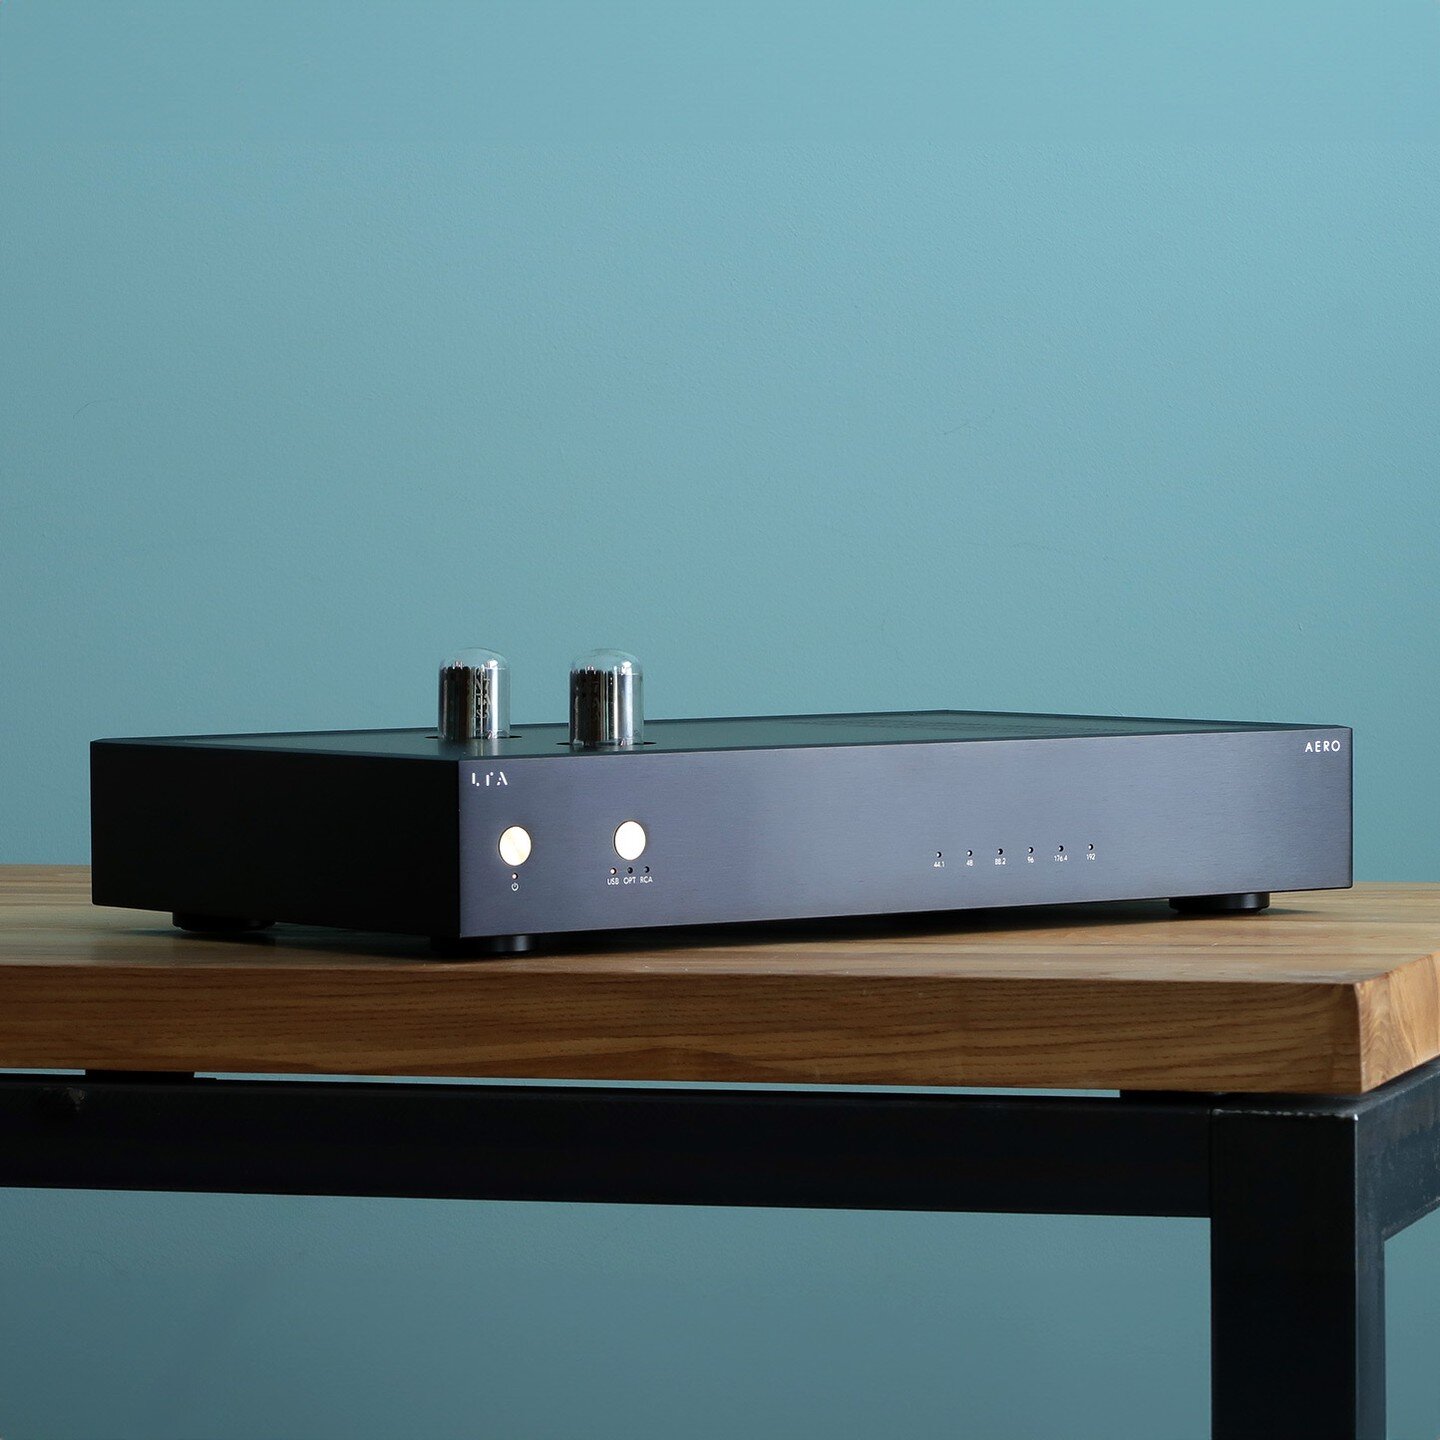 Aero: Linear Tube Audio&rsquo;s first-ever digital-to-analog converter, and the world&rsquo;s first DAC using ZOTL technology.

Coming soon. More info at the link in our bio 🔗

#dac #tubedac #hifi #hifiaudio #highendaudio #audiophile